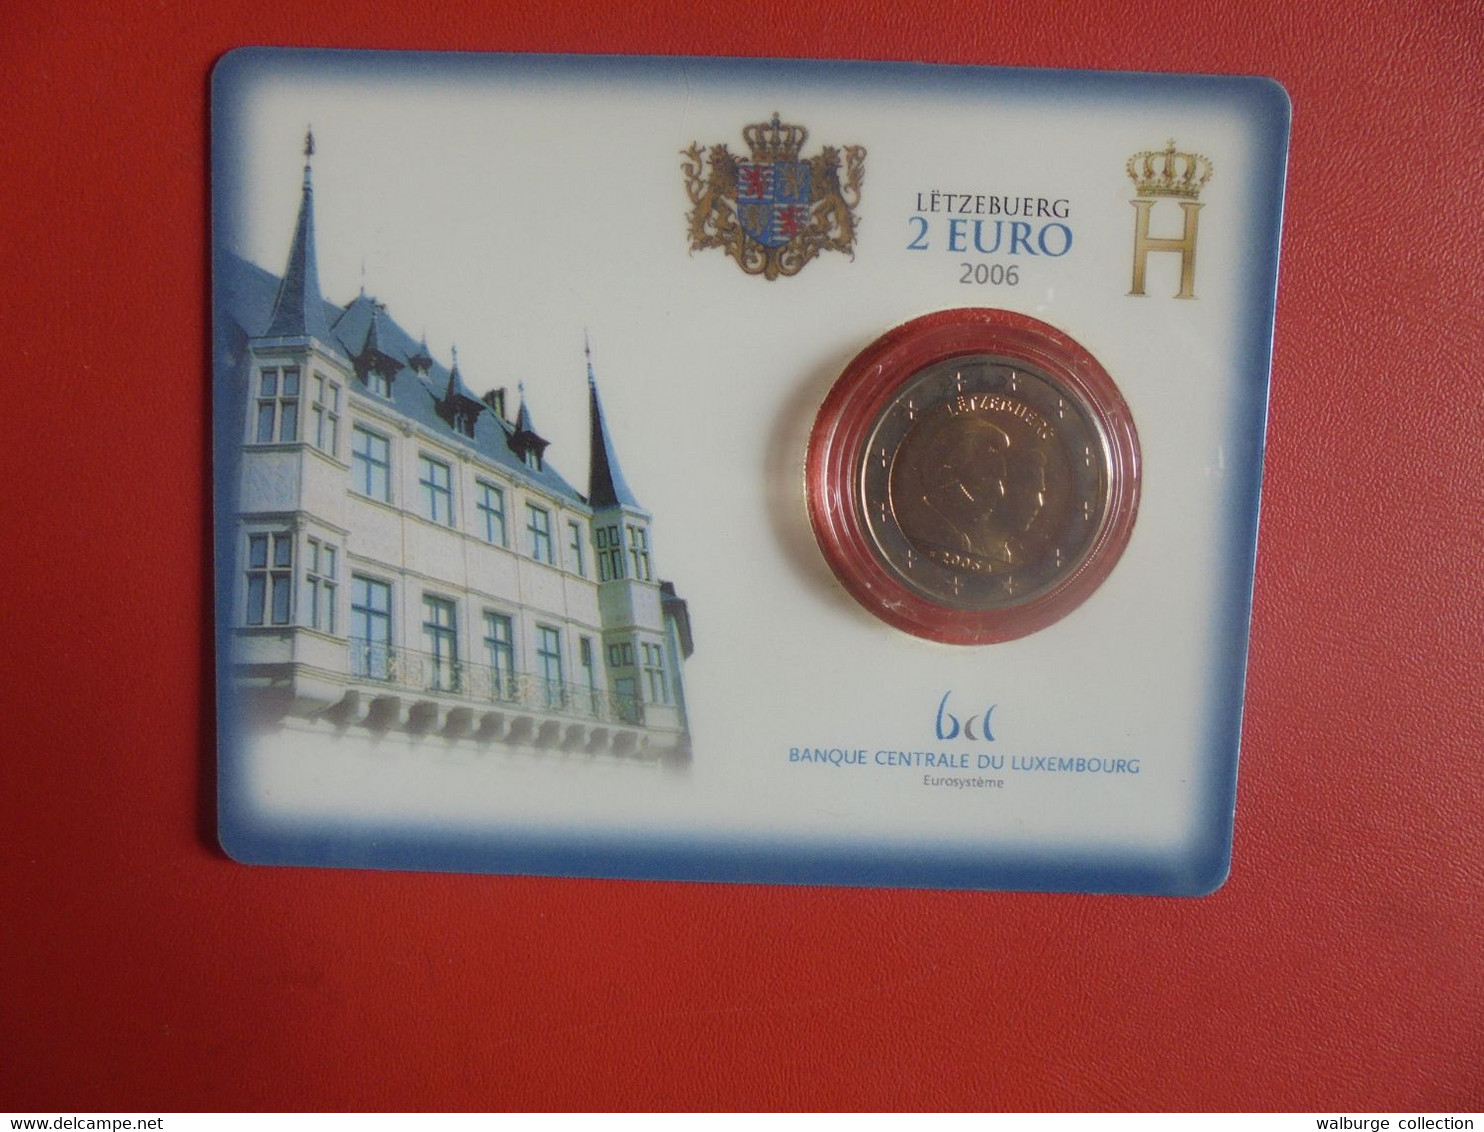 LUXEMBOURG 2 EURO 2006 En COIN-CARD EDITION LIMITEE (Tirage Au Dos) - Luxemburgo